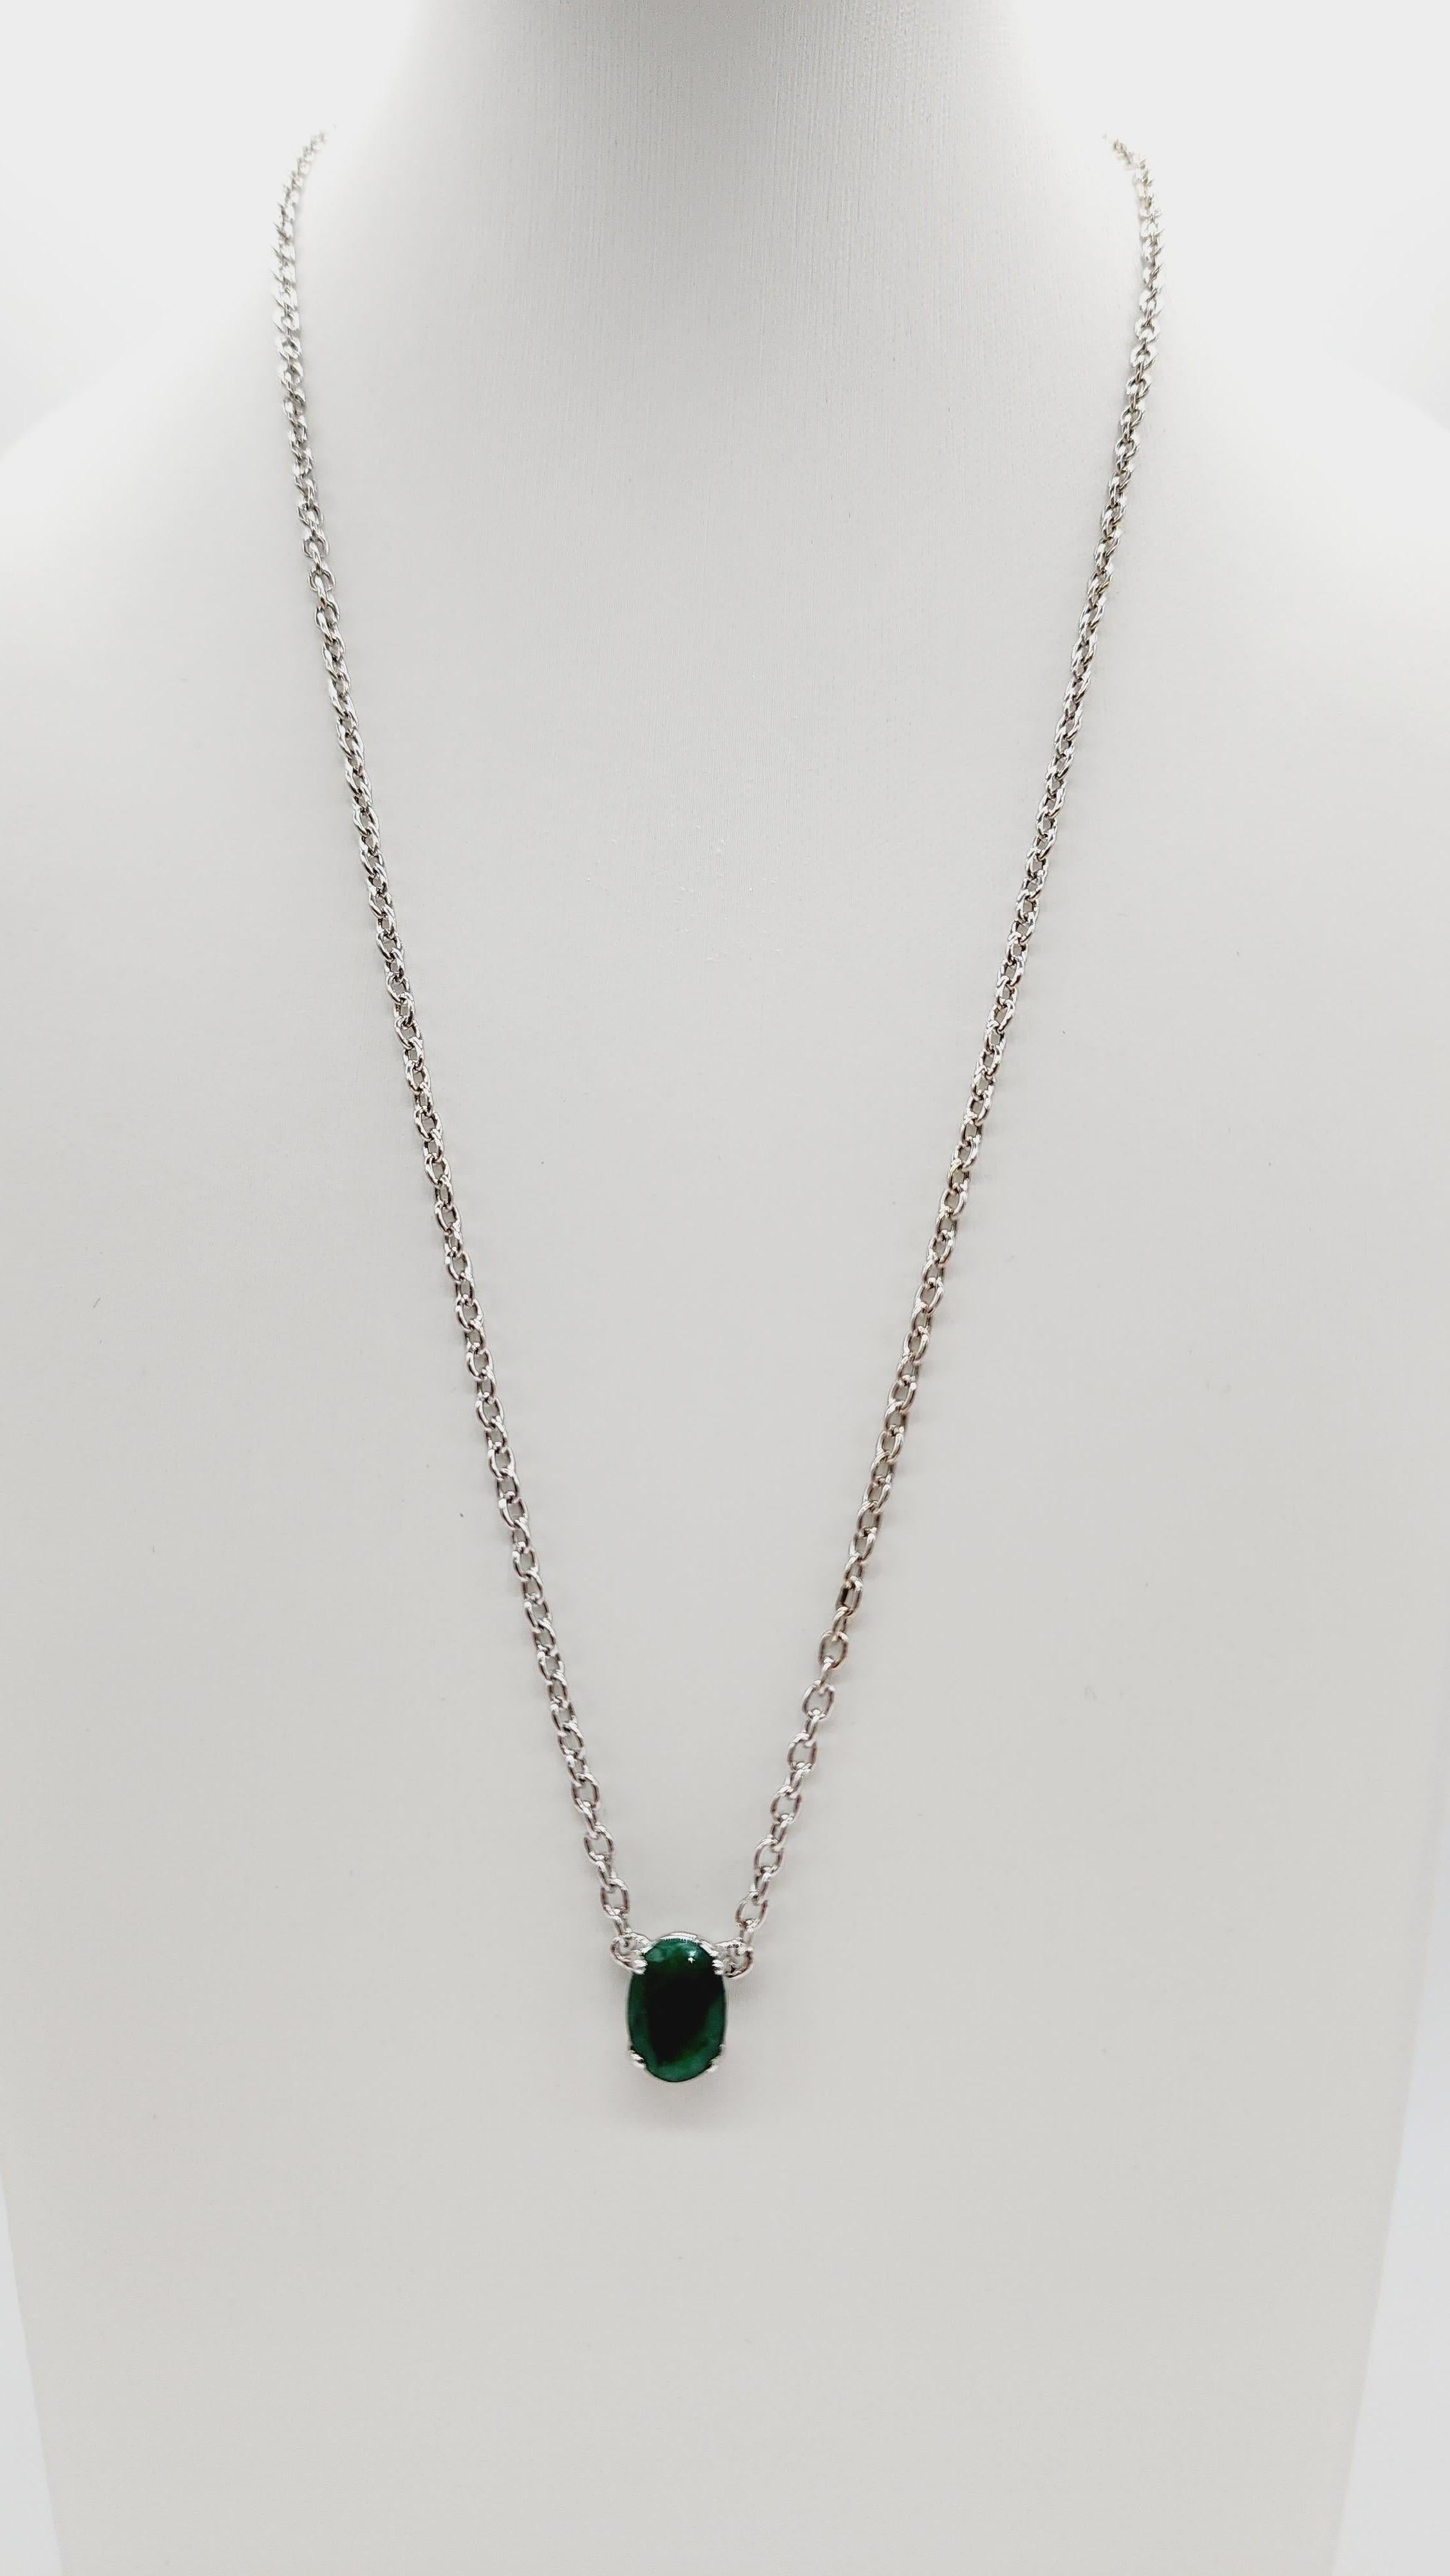 Brilliant and beautiful. 14 Karat White Gold Necklace. Oval Shape Emerald Center. Insert clasp closure with safety secure latch. Elegance you can wear everyday.

Center emerald weight: 2.18 carats 
Setting type: 14k White gold
Length: 20 inches